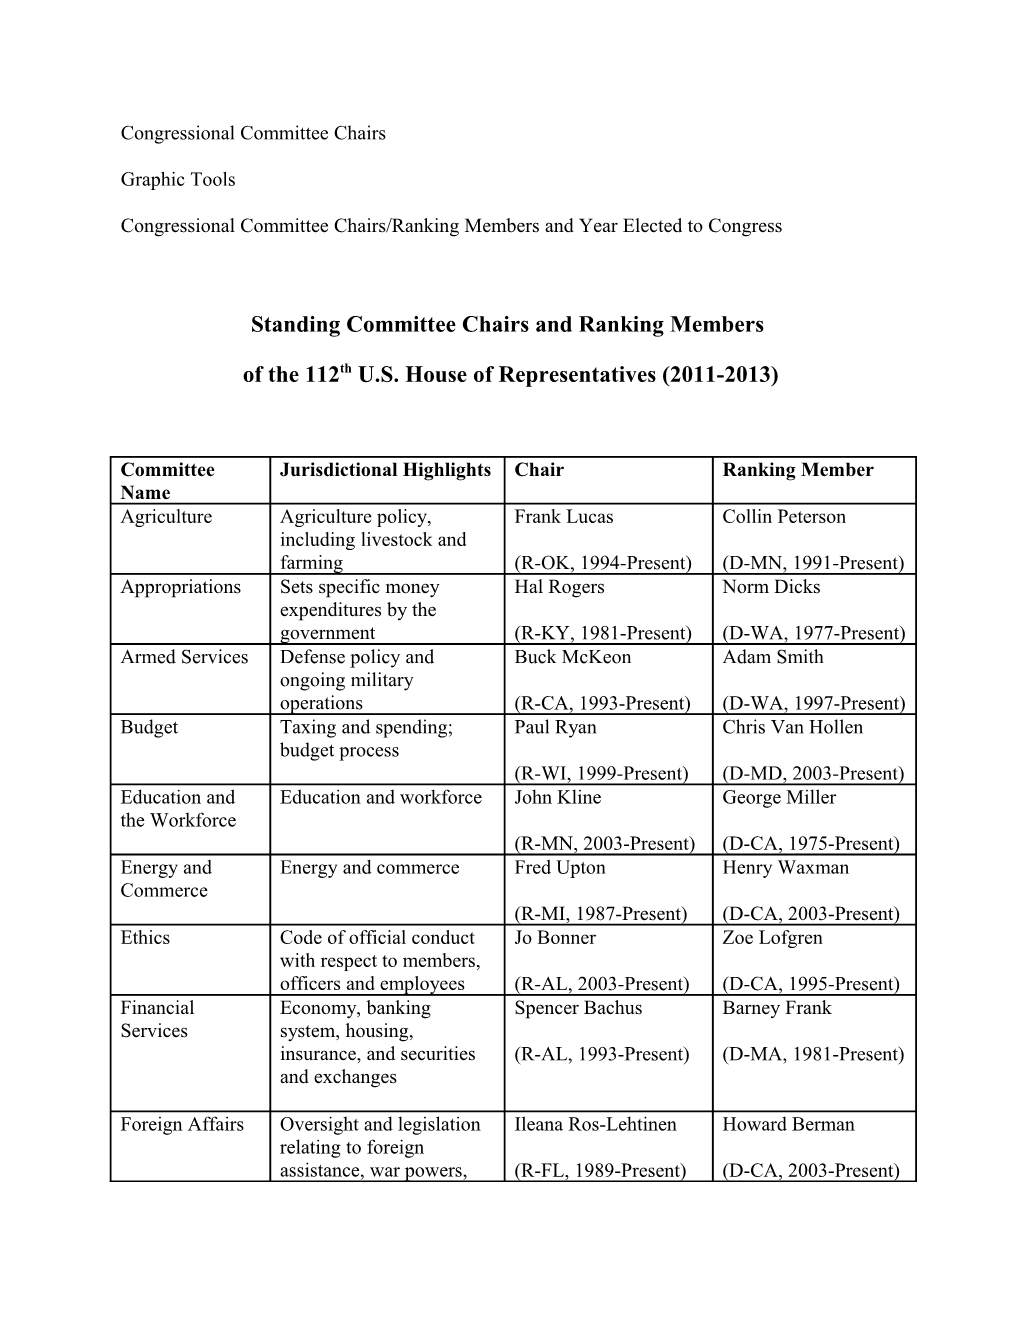 Standing Committee Chairs and Ranking Members